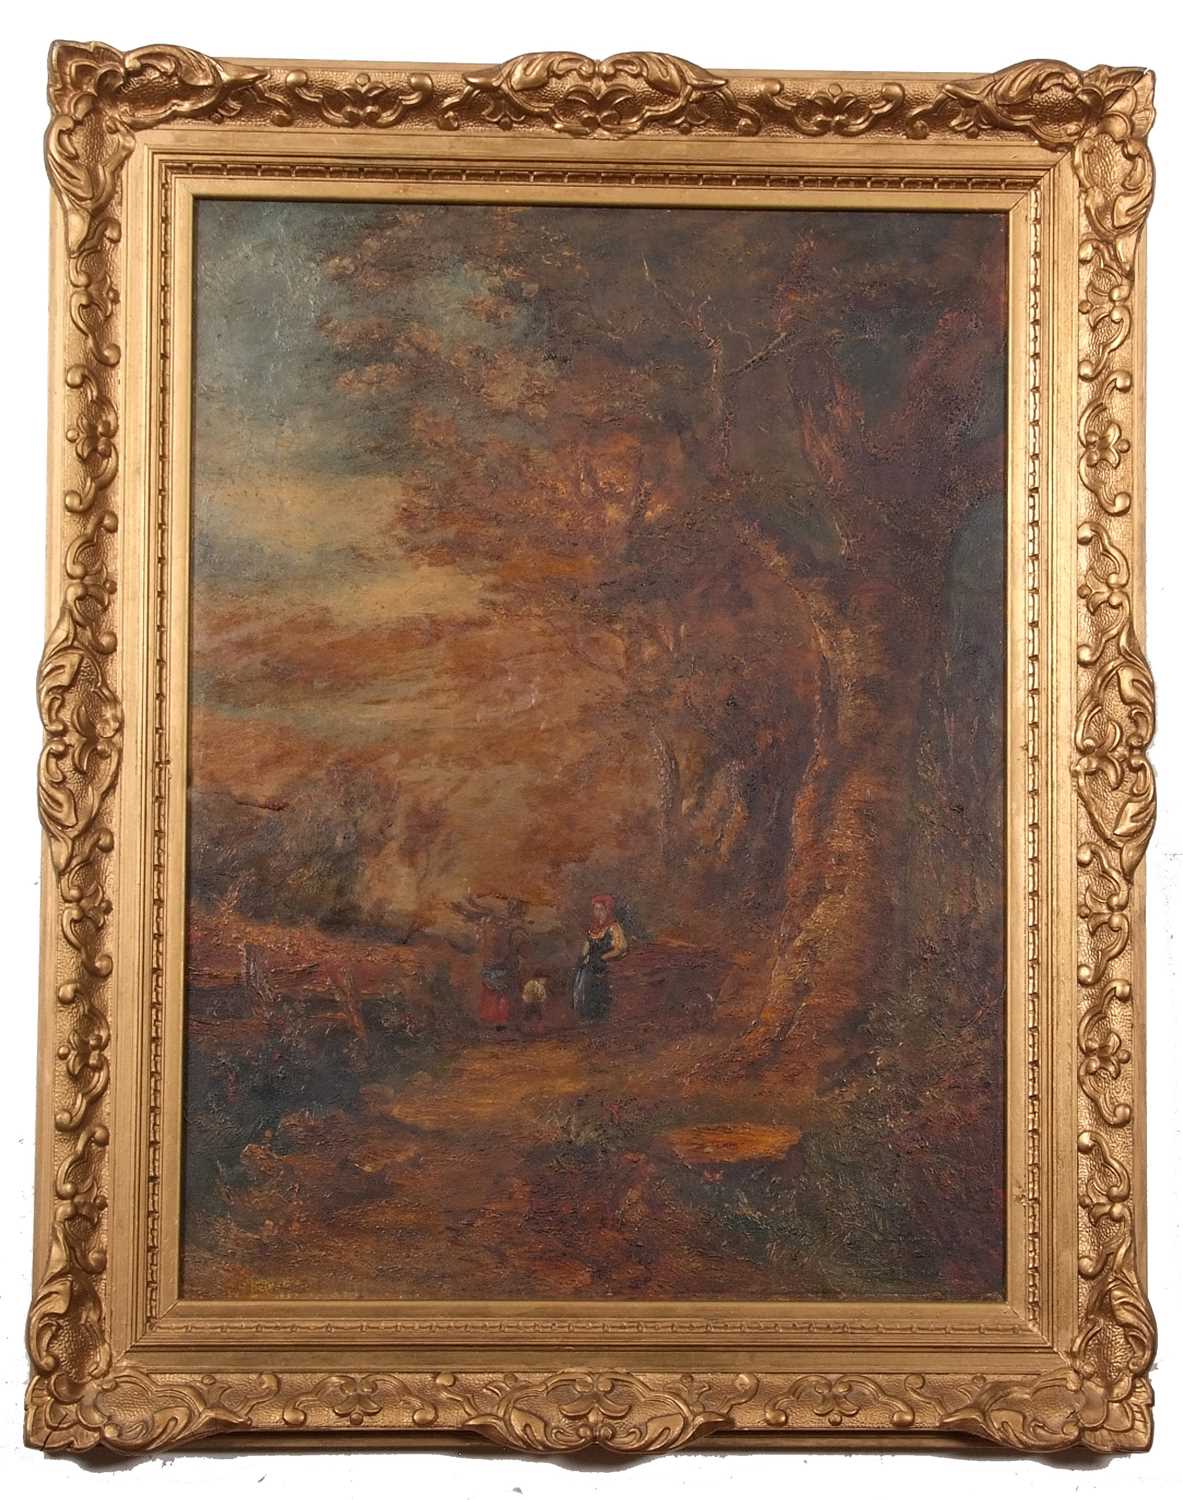 French School, 19th Century, A woodland scene with figures along a path, oil on canvas, 24x17insQty: - Image 2 of 3